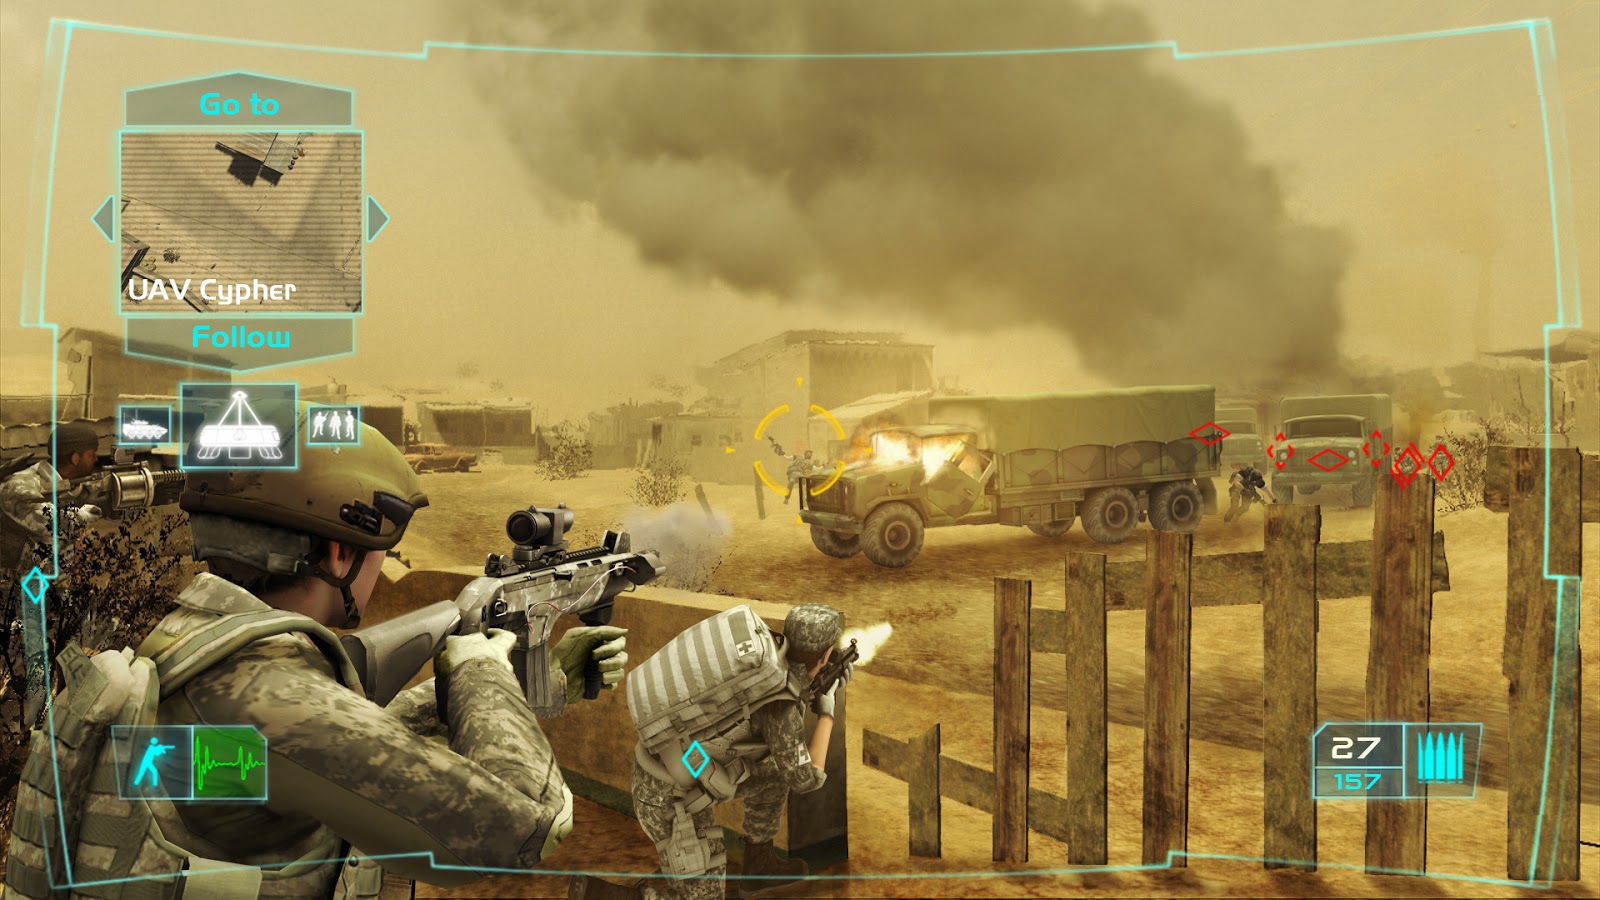 ghost recon advanced warfighter 2 multiplayer